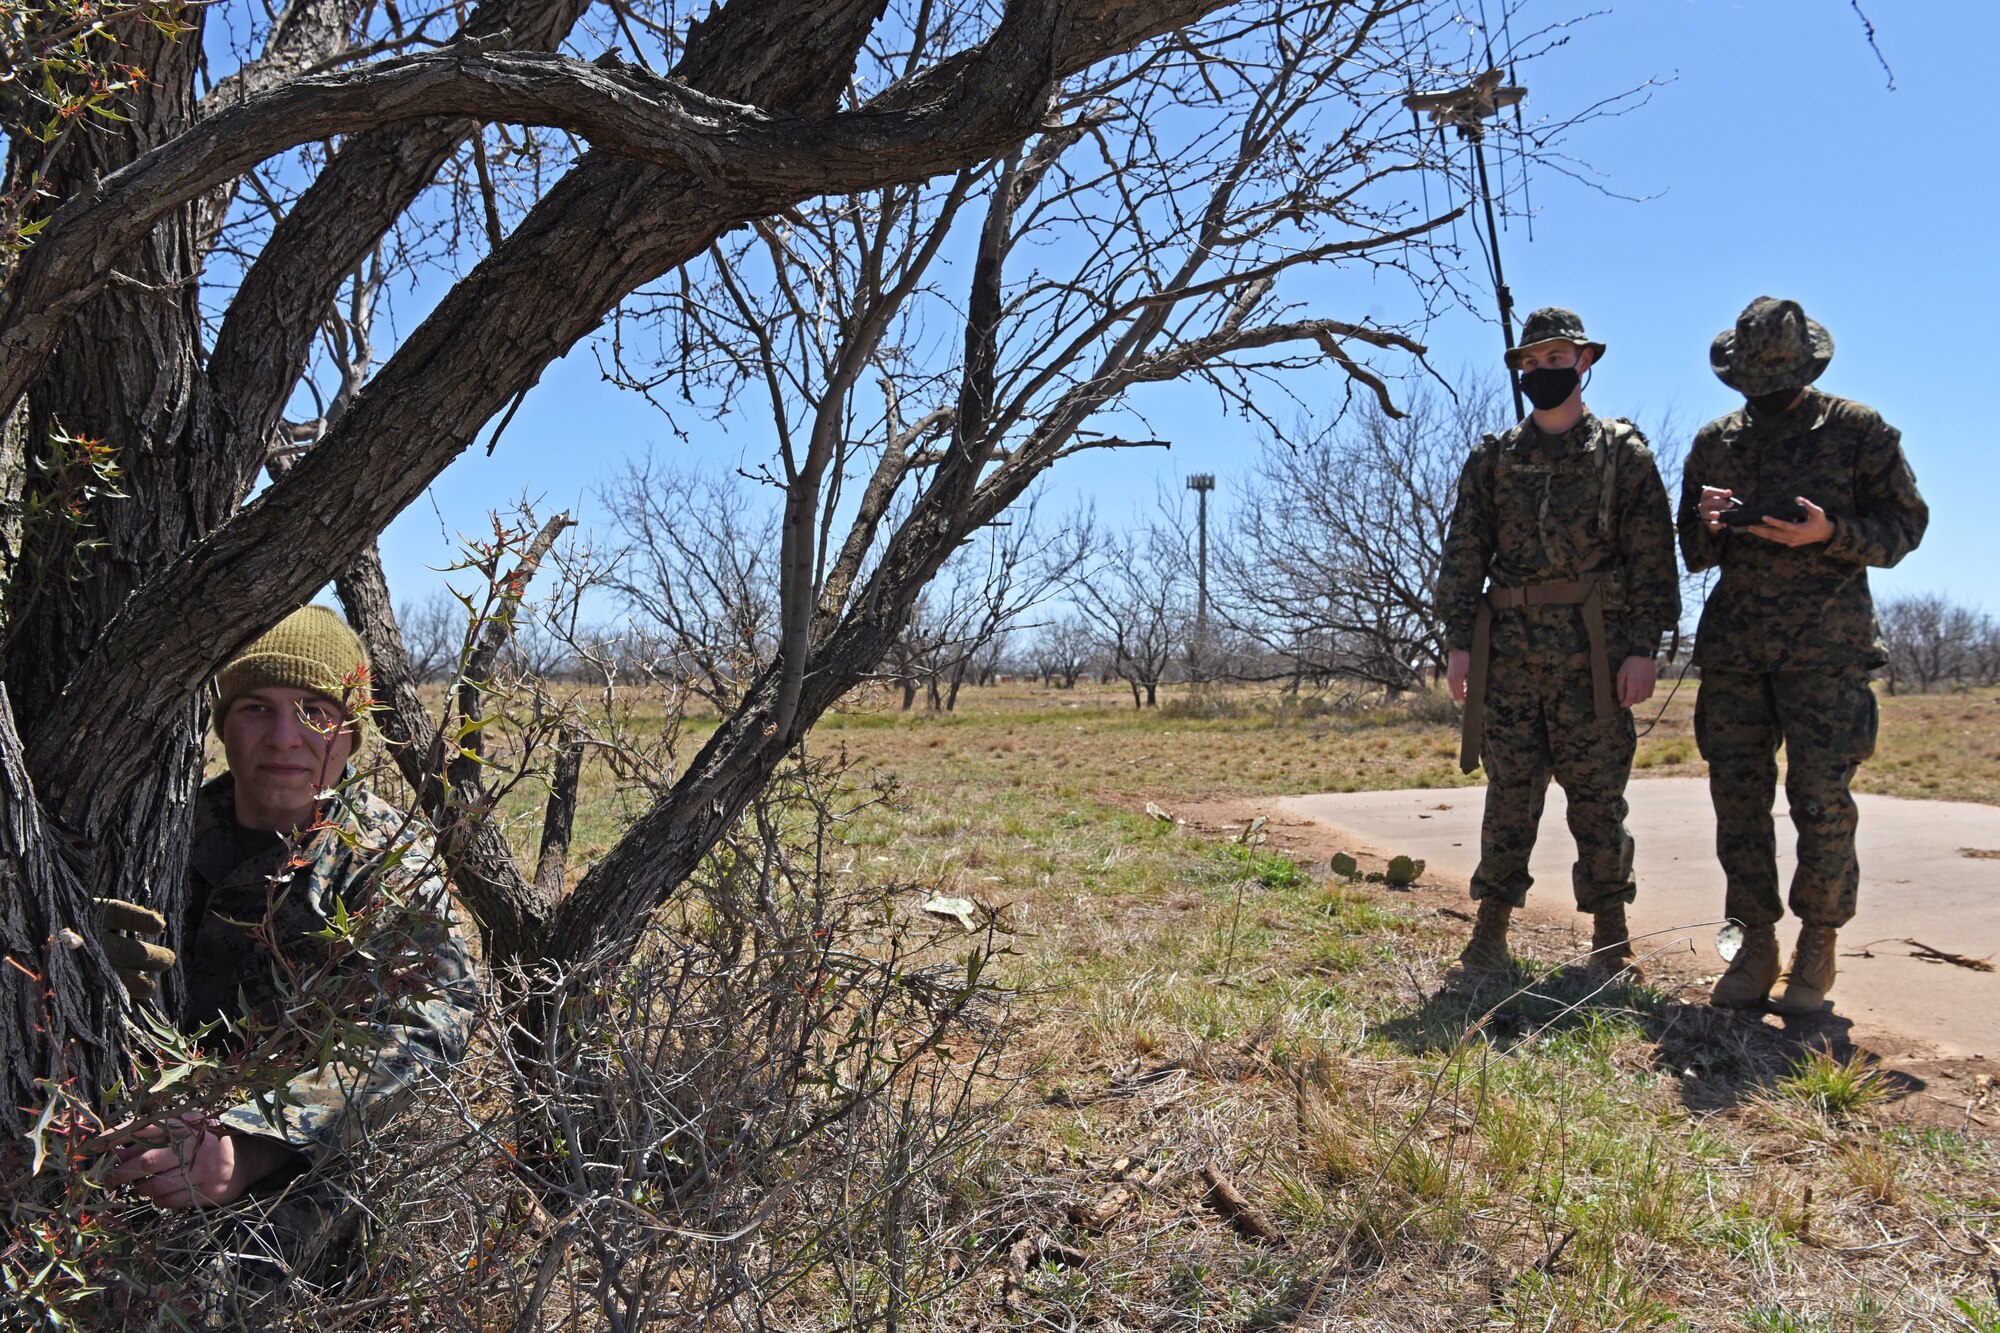 U.S. Marine Corps Tactical Signals Intelligence Operator course students from the Marine Corps Detachment, successfully locate Lance Cpl. Dylan Benedict, MCD TSOC course student, during an intelligence field exercise outside of the MCD dormitories on Goodfellow Air Force Base, Texas, March 23, 2021.  Benedict was tracked by radio frequency, intelligence, and GPS coordinates. (U.S. Air Force photo by Senior Airman Abbey Rieves)